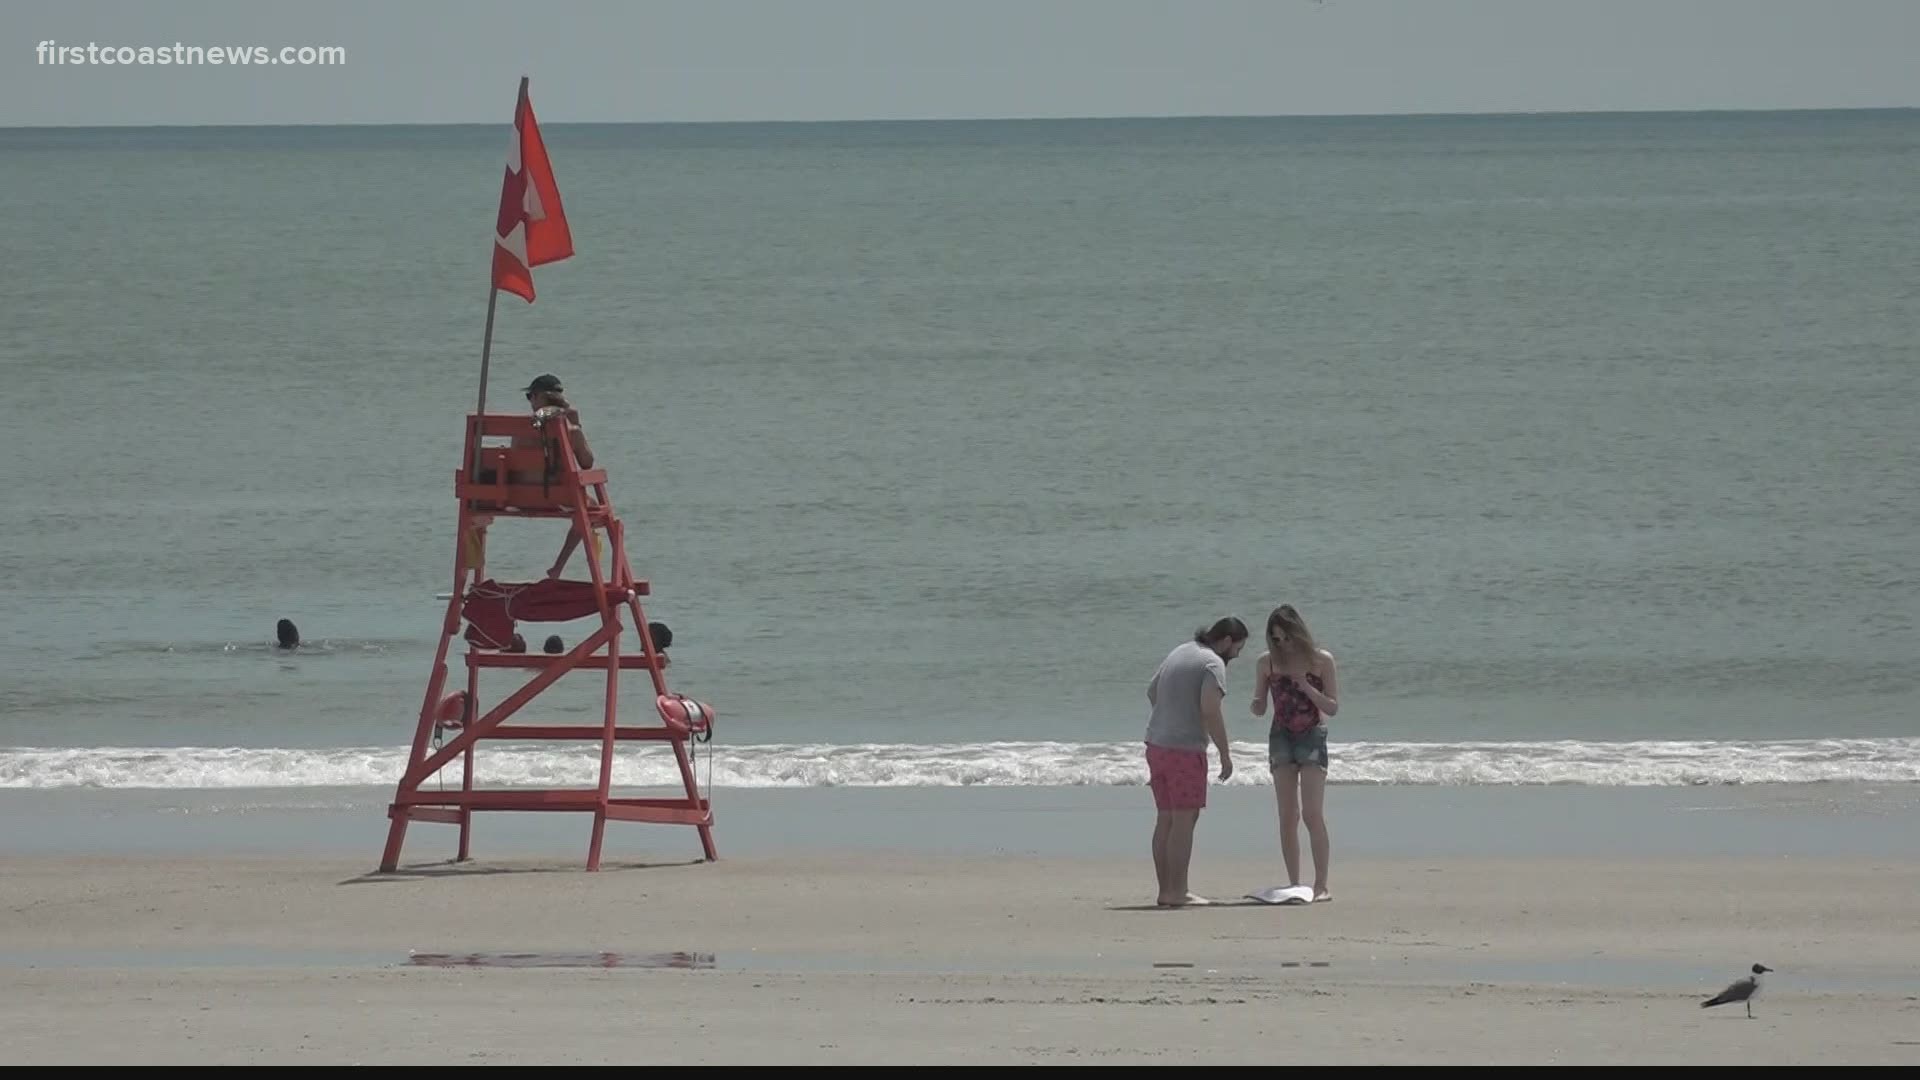 Lifeguards offer tips for a safe 4th of July on the beach